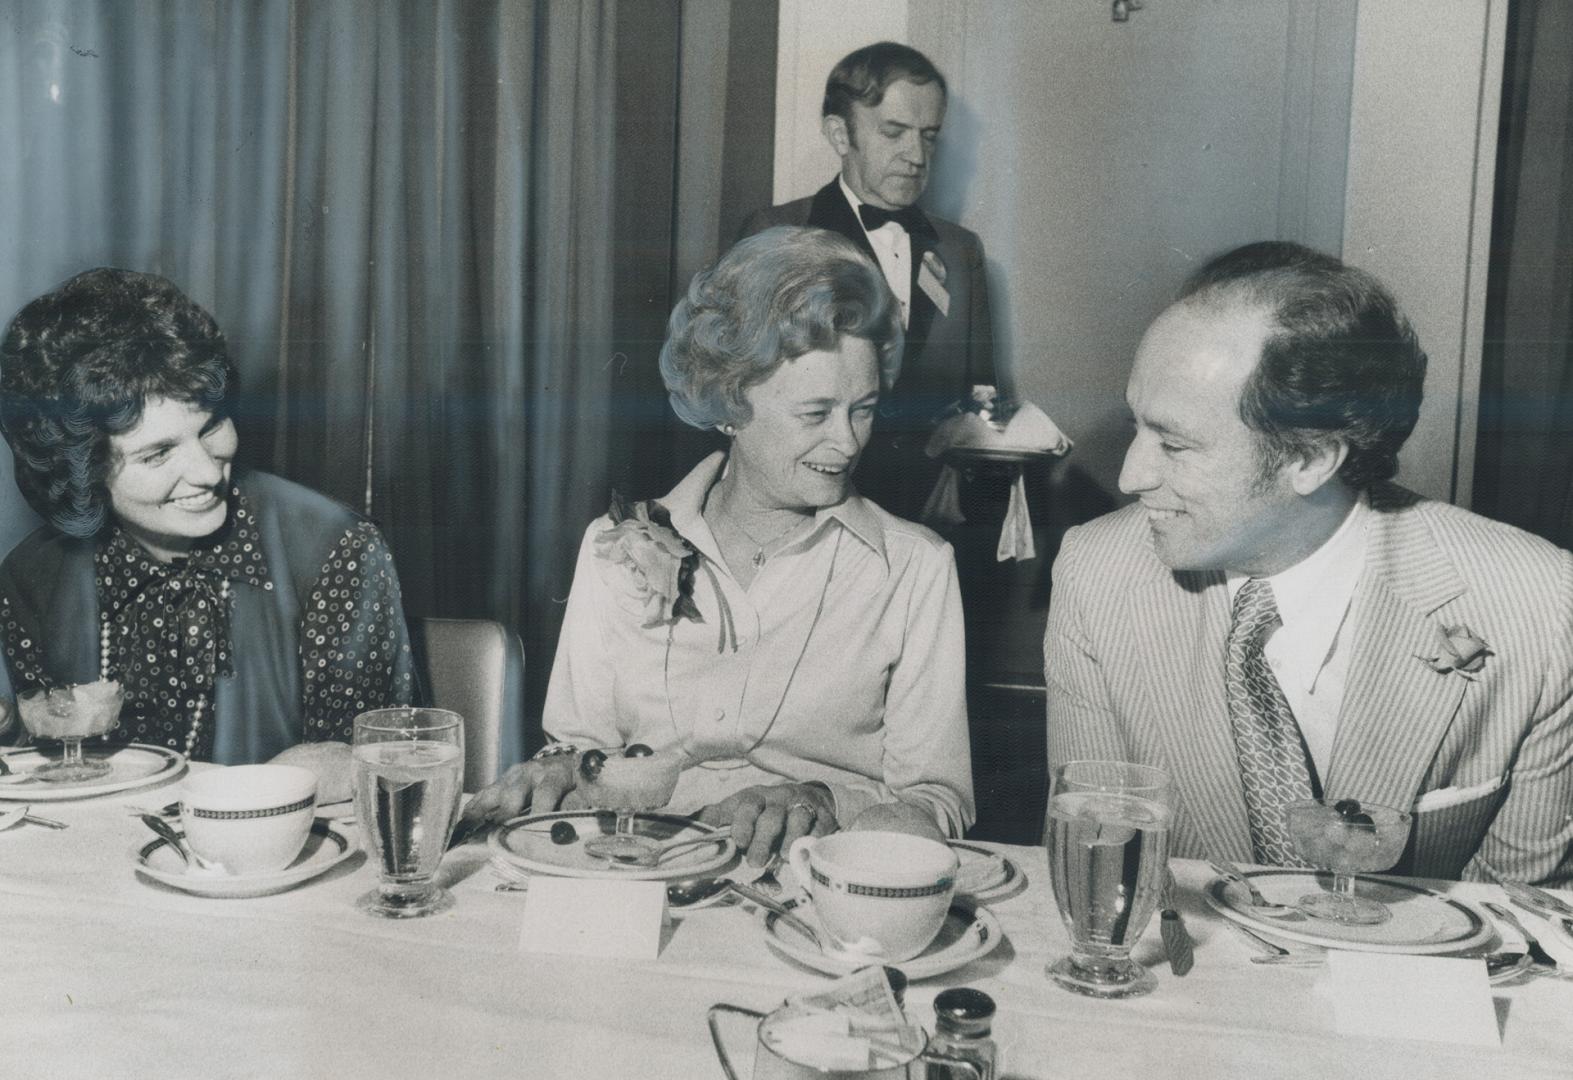 Undisturbed by Picketers outside, Prime Minister Pierre Trudeau and his wife Margaret chat with Mrs